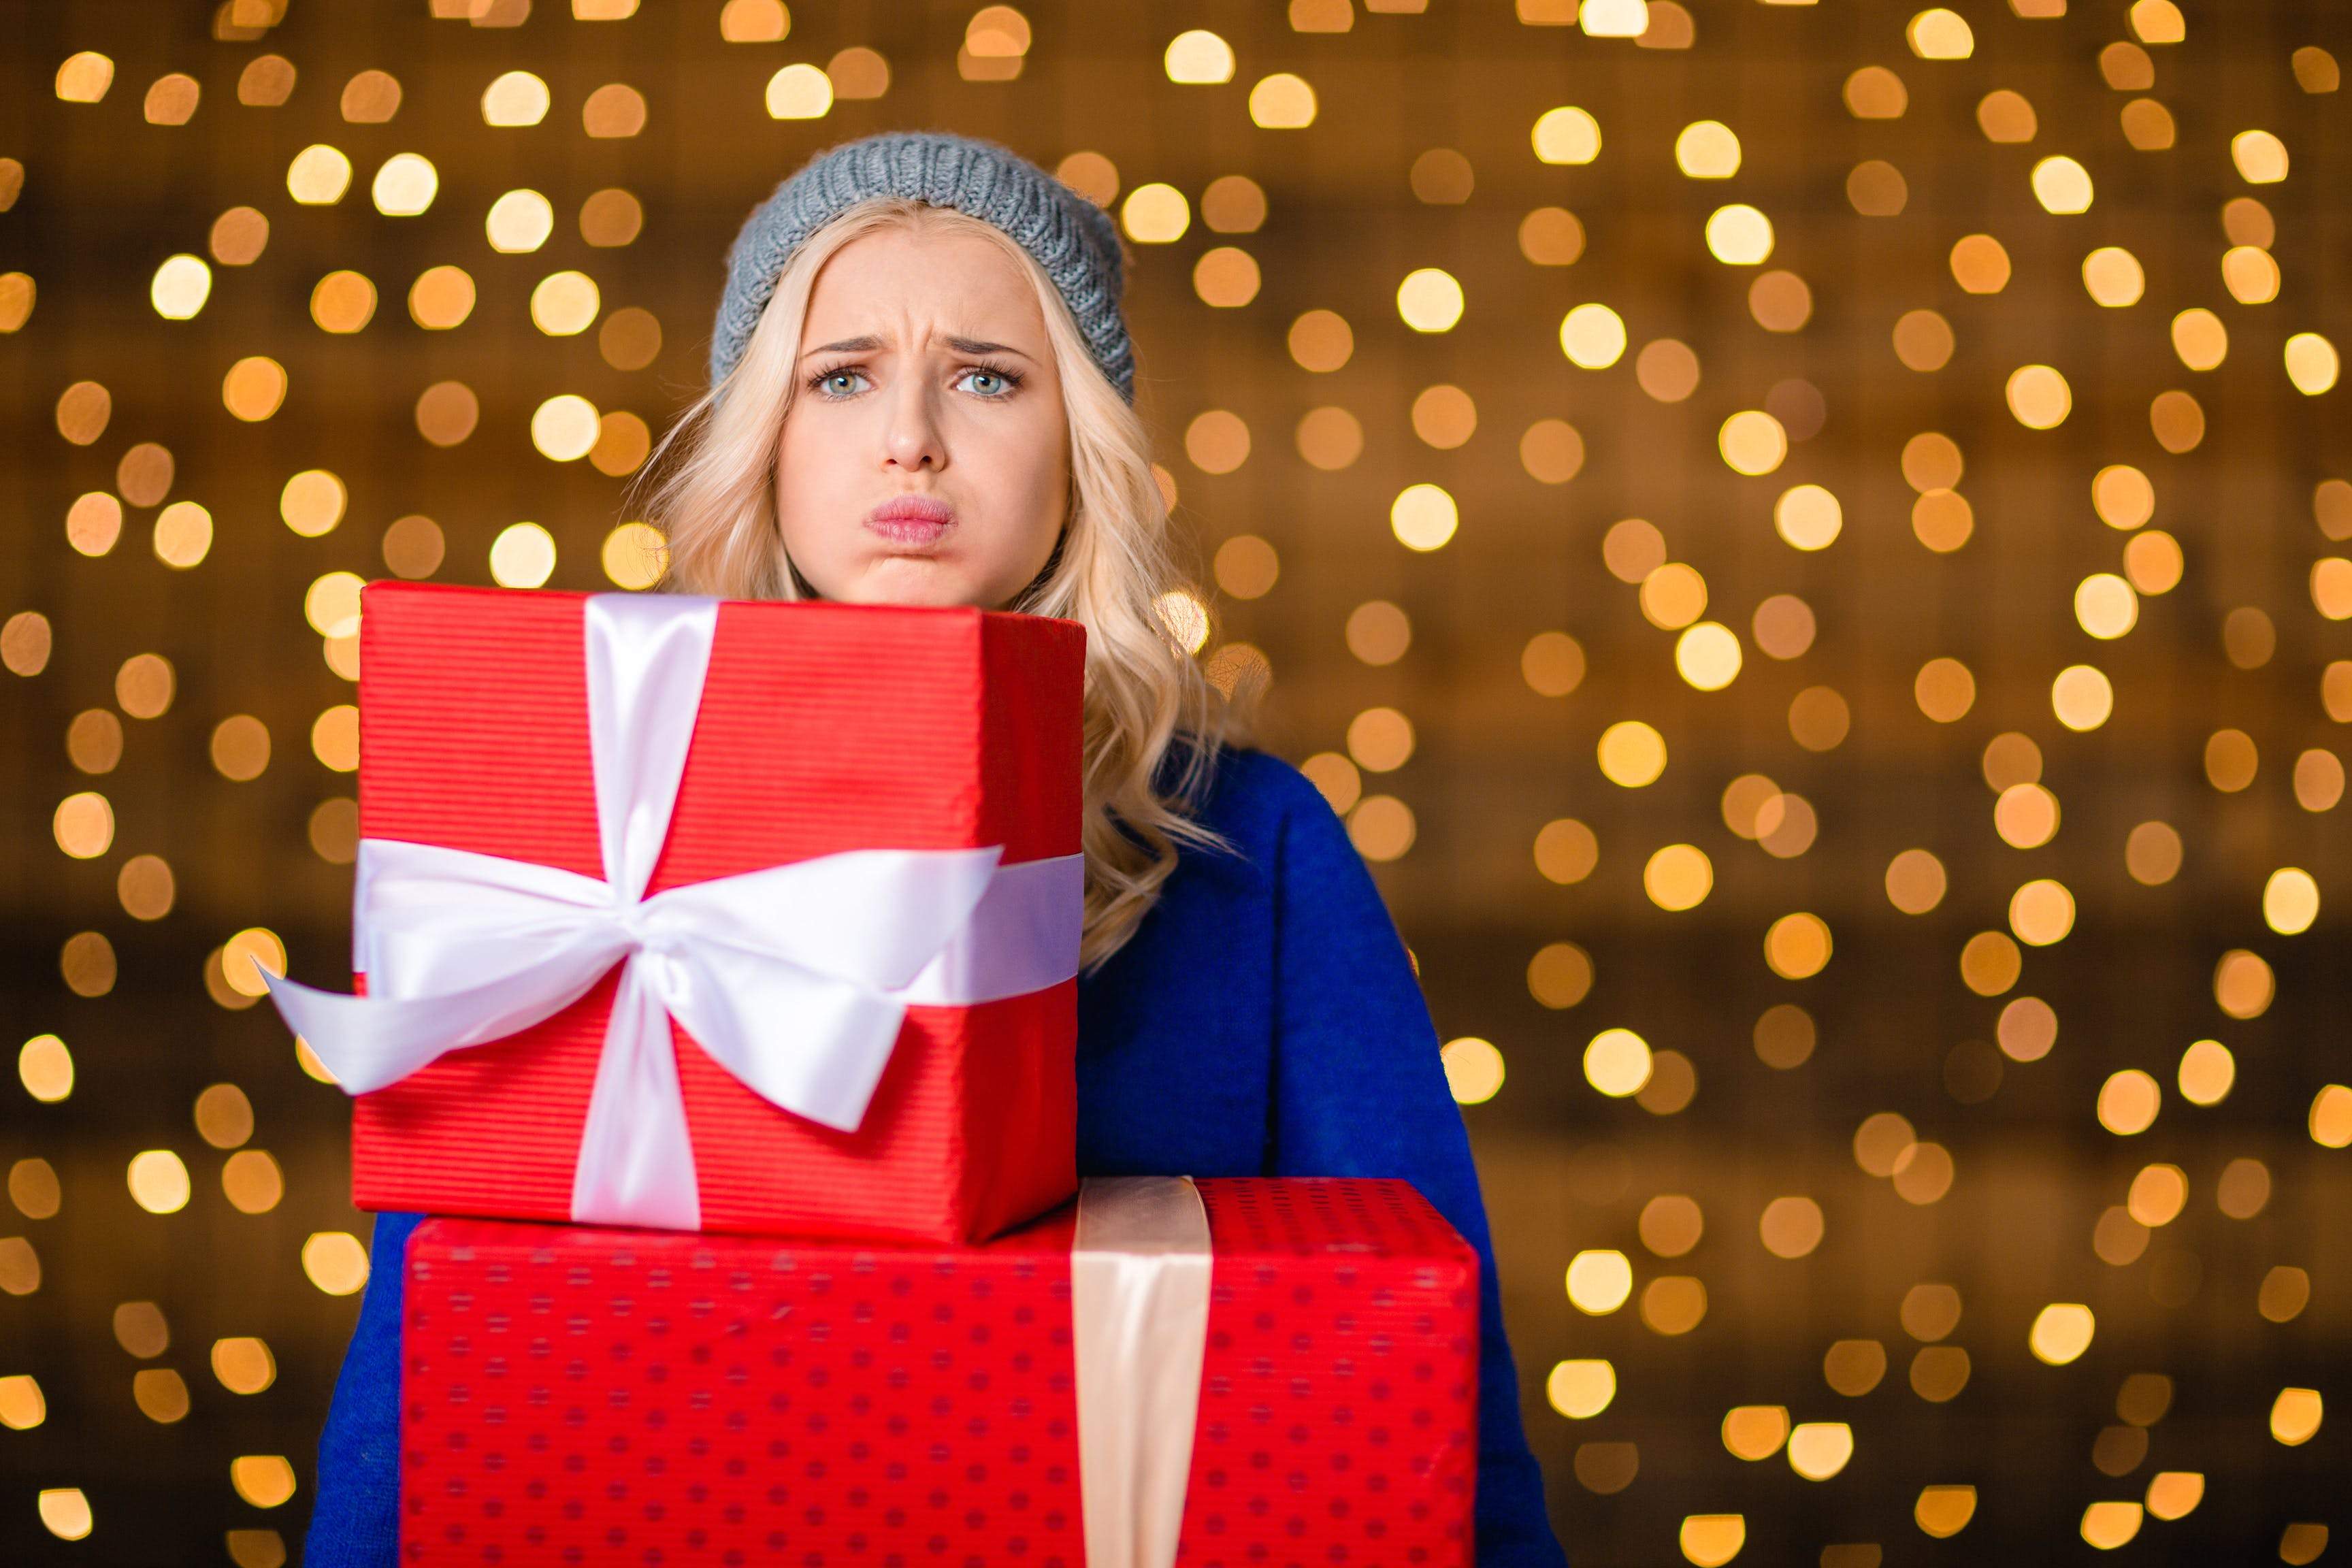 How to Cope with Holiday Stress